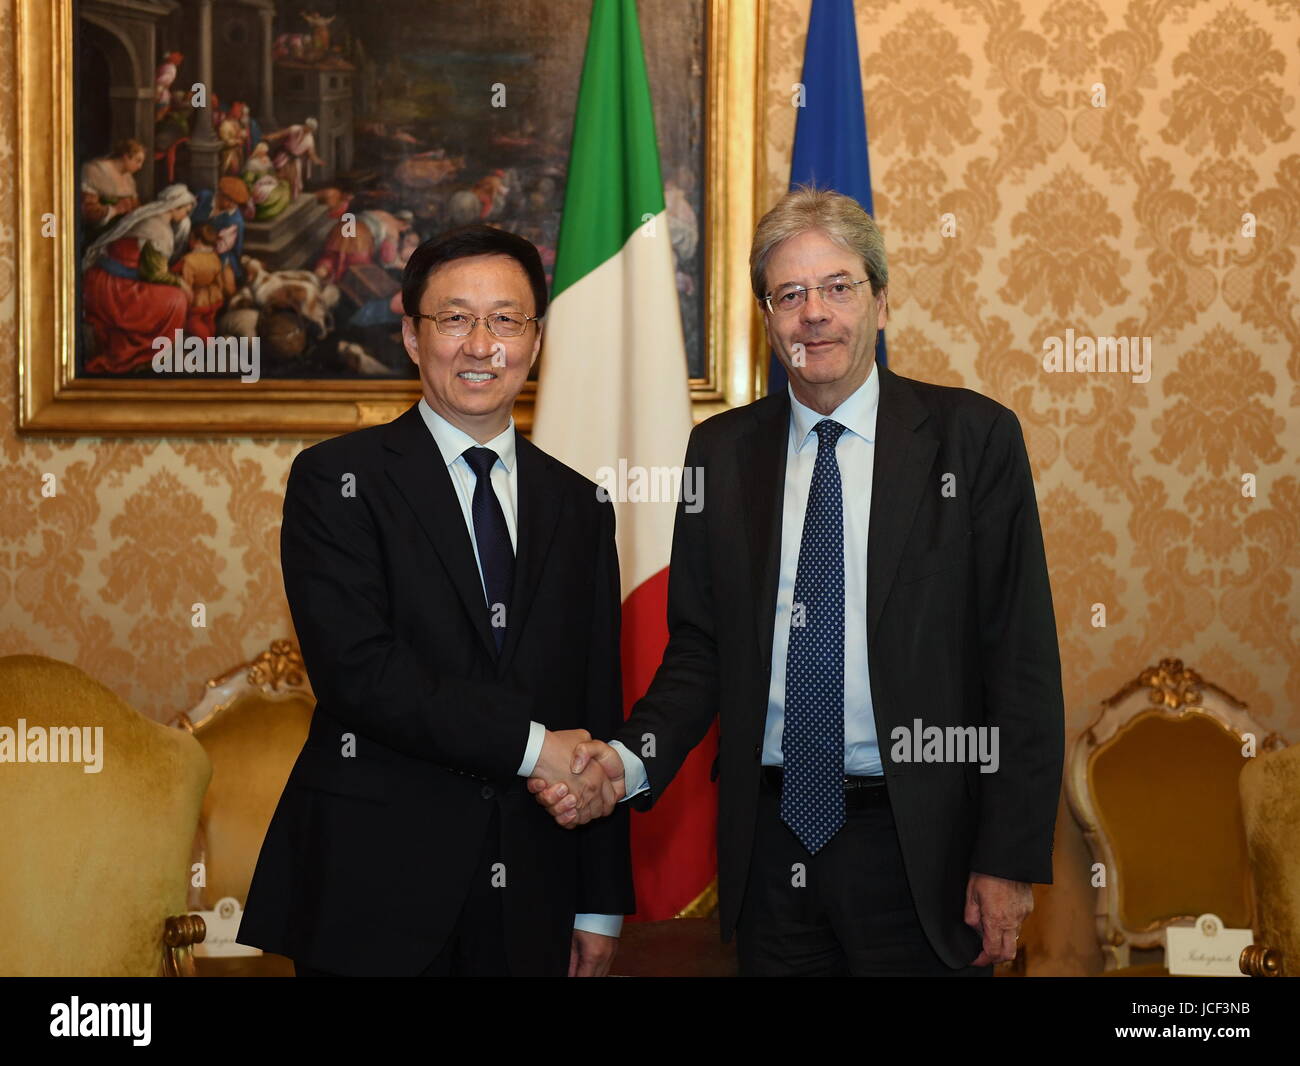 Rome, Italy. 14th June, 2017. Italian Prime Minister Paolo Gentiloni (R) shakes hands with Han Zheng, a member of the Political Bureau of the Central Committee of the Communist Party of China (CPC) and secretary of the CPC Shanghai Municipal Committee, during their meeting in Rome, Italy, on June 14, 2017. Credit: Chen Zhengbao/Xinhua/Alamy Live News Stock Photo